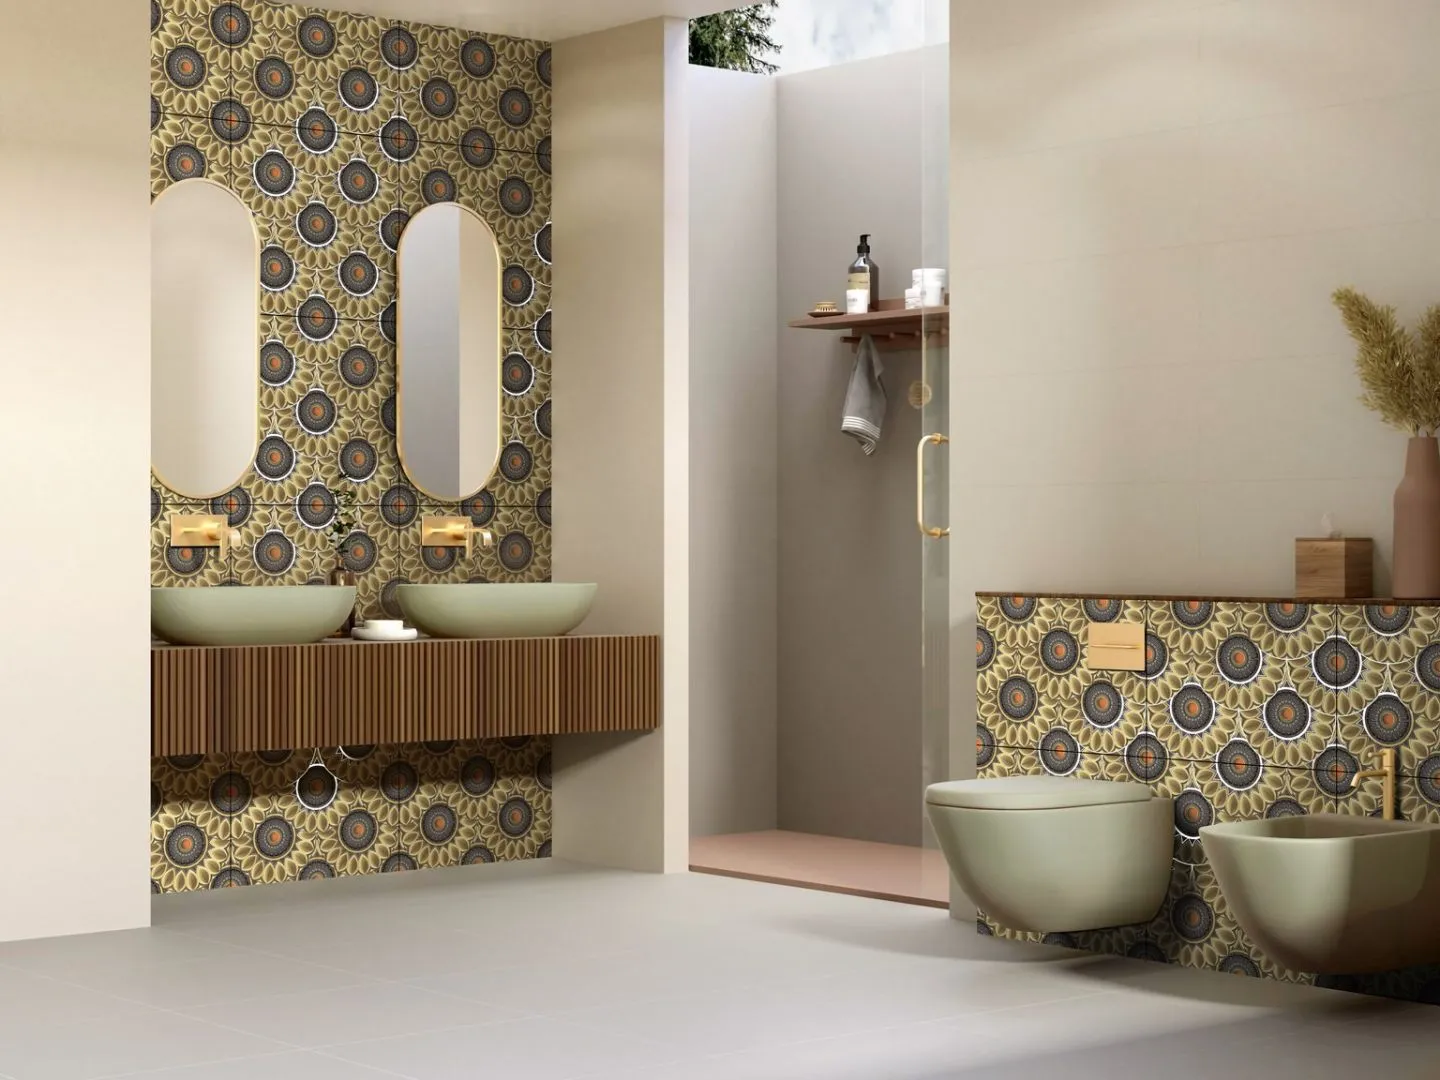 Floors to Walls: Applications of Bookmatch Tiles in UK Home